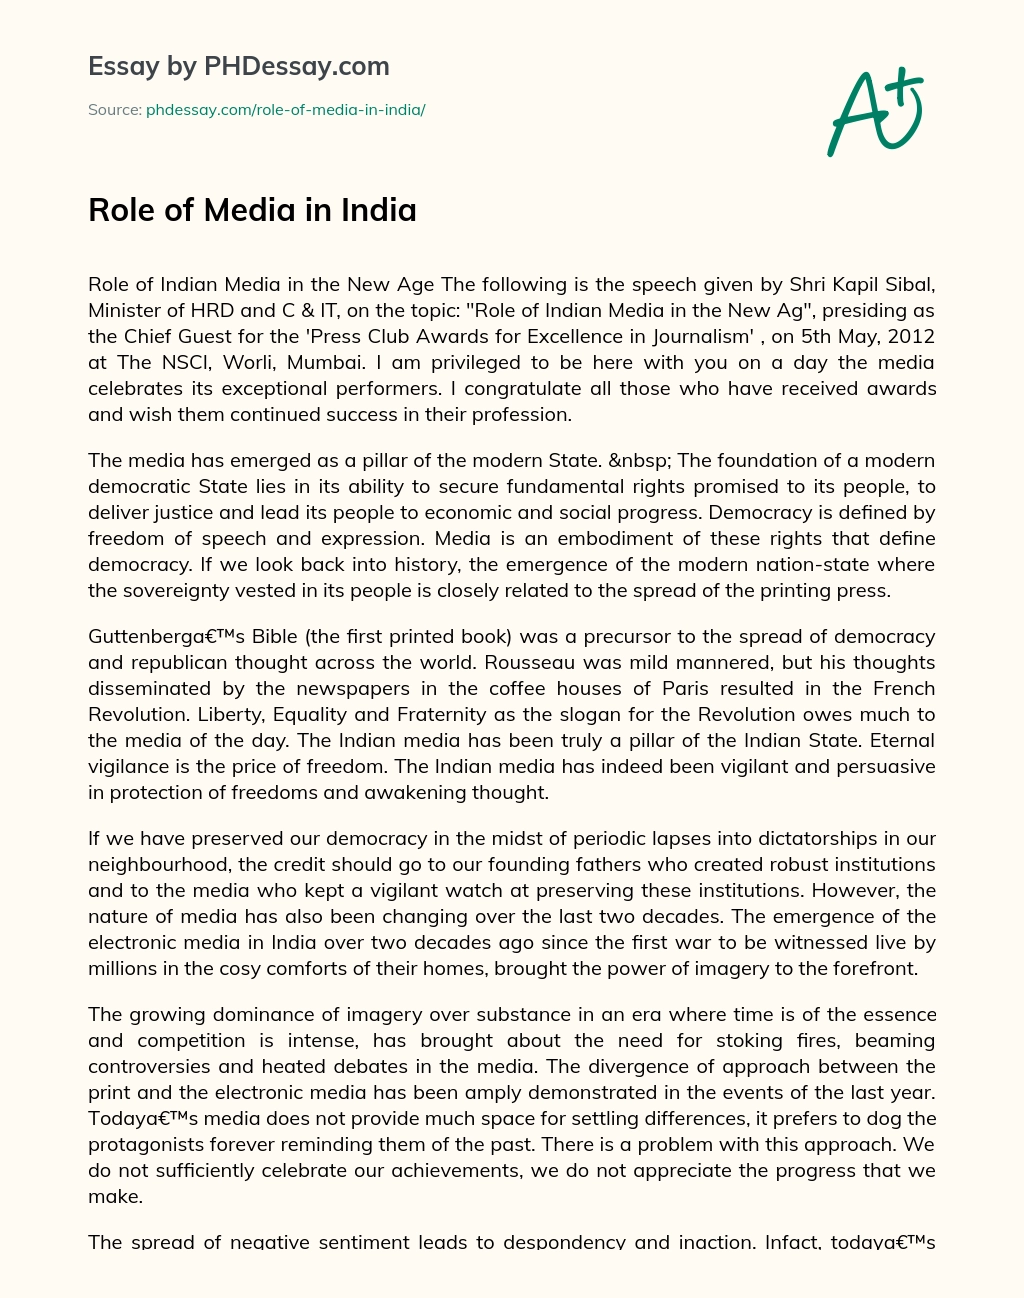 Role of Media in India essay